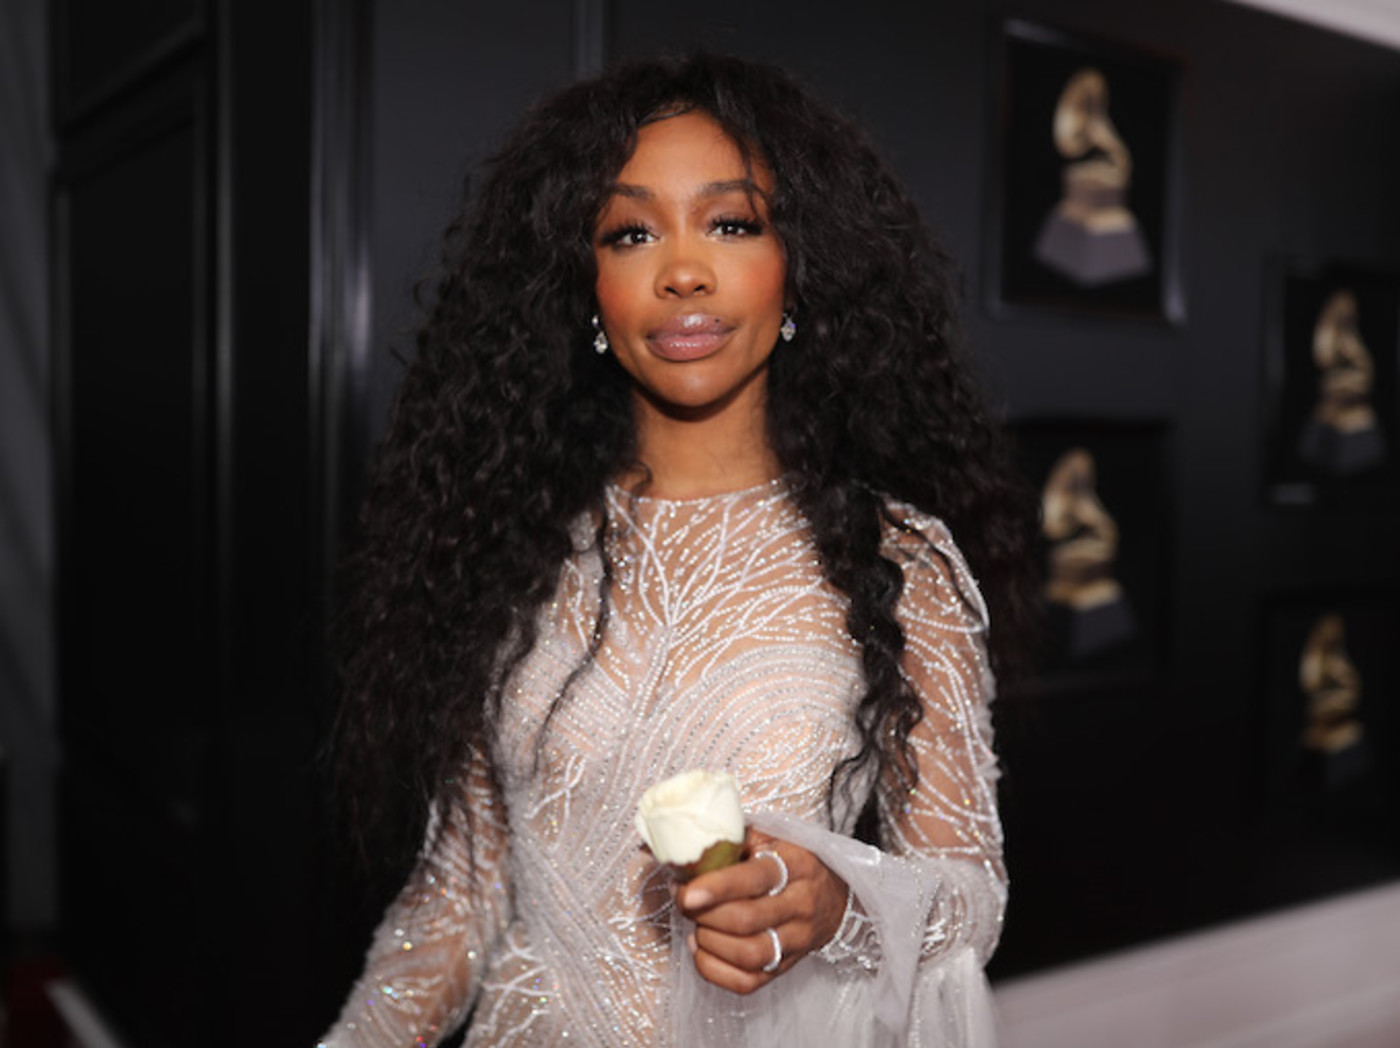 SZA Says If God Blessed Her With a Grammy She Would 'Have Nothing Else